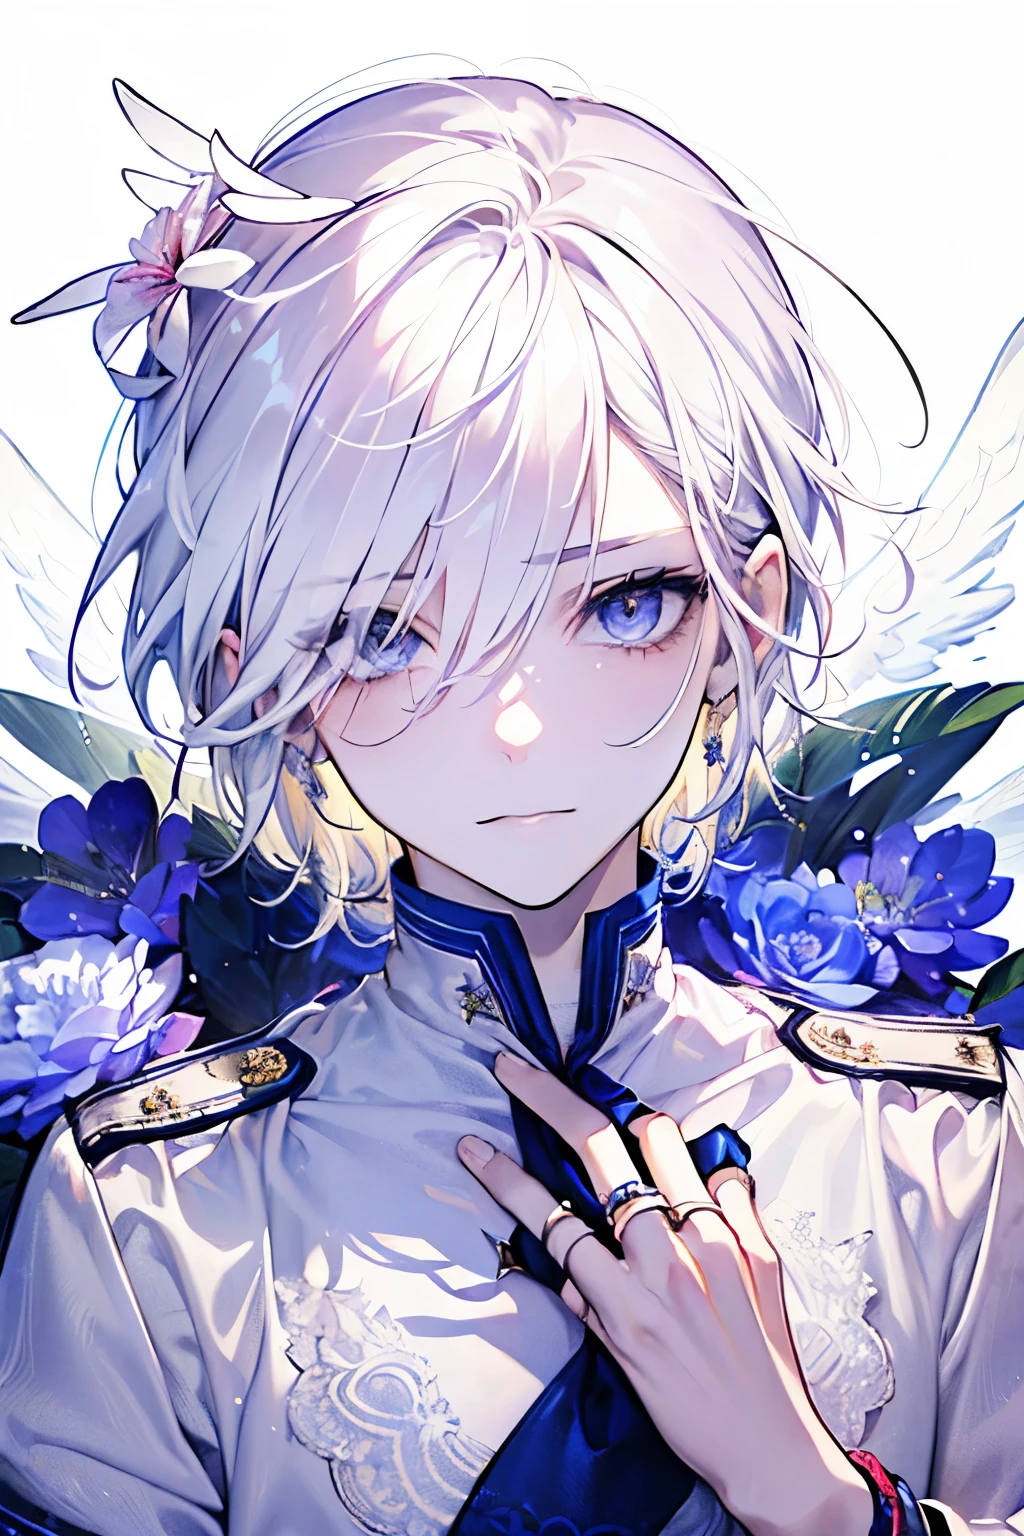 ((17years old man:1.2)),((male:1.5)),masterpiece, best quality,(milky White hair:1.45), (portrait),(shiny NAVY eyes:1.5), white wedding dress,(pop and cute flower pattern background), (perfect hand:1.2),(pink,yellow,purple,white),looking front,((Her bangs are so long that they cover one eye:1.3)),Mischievous smile,(Looking up:1.2),((upper body)),((Top view:1.1)),((Angel ring:1.3))